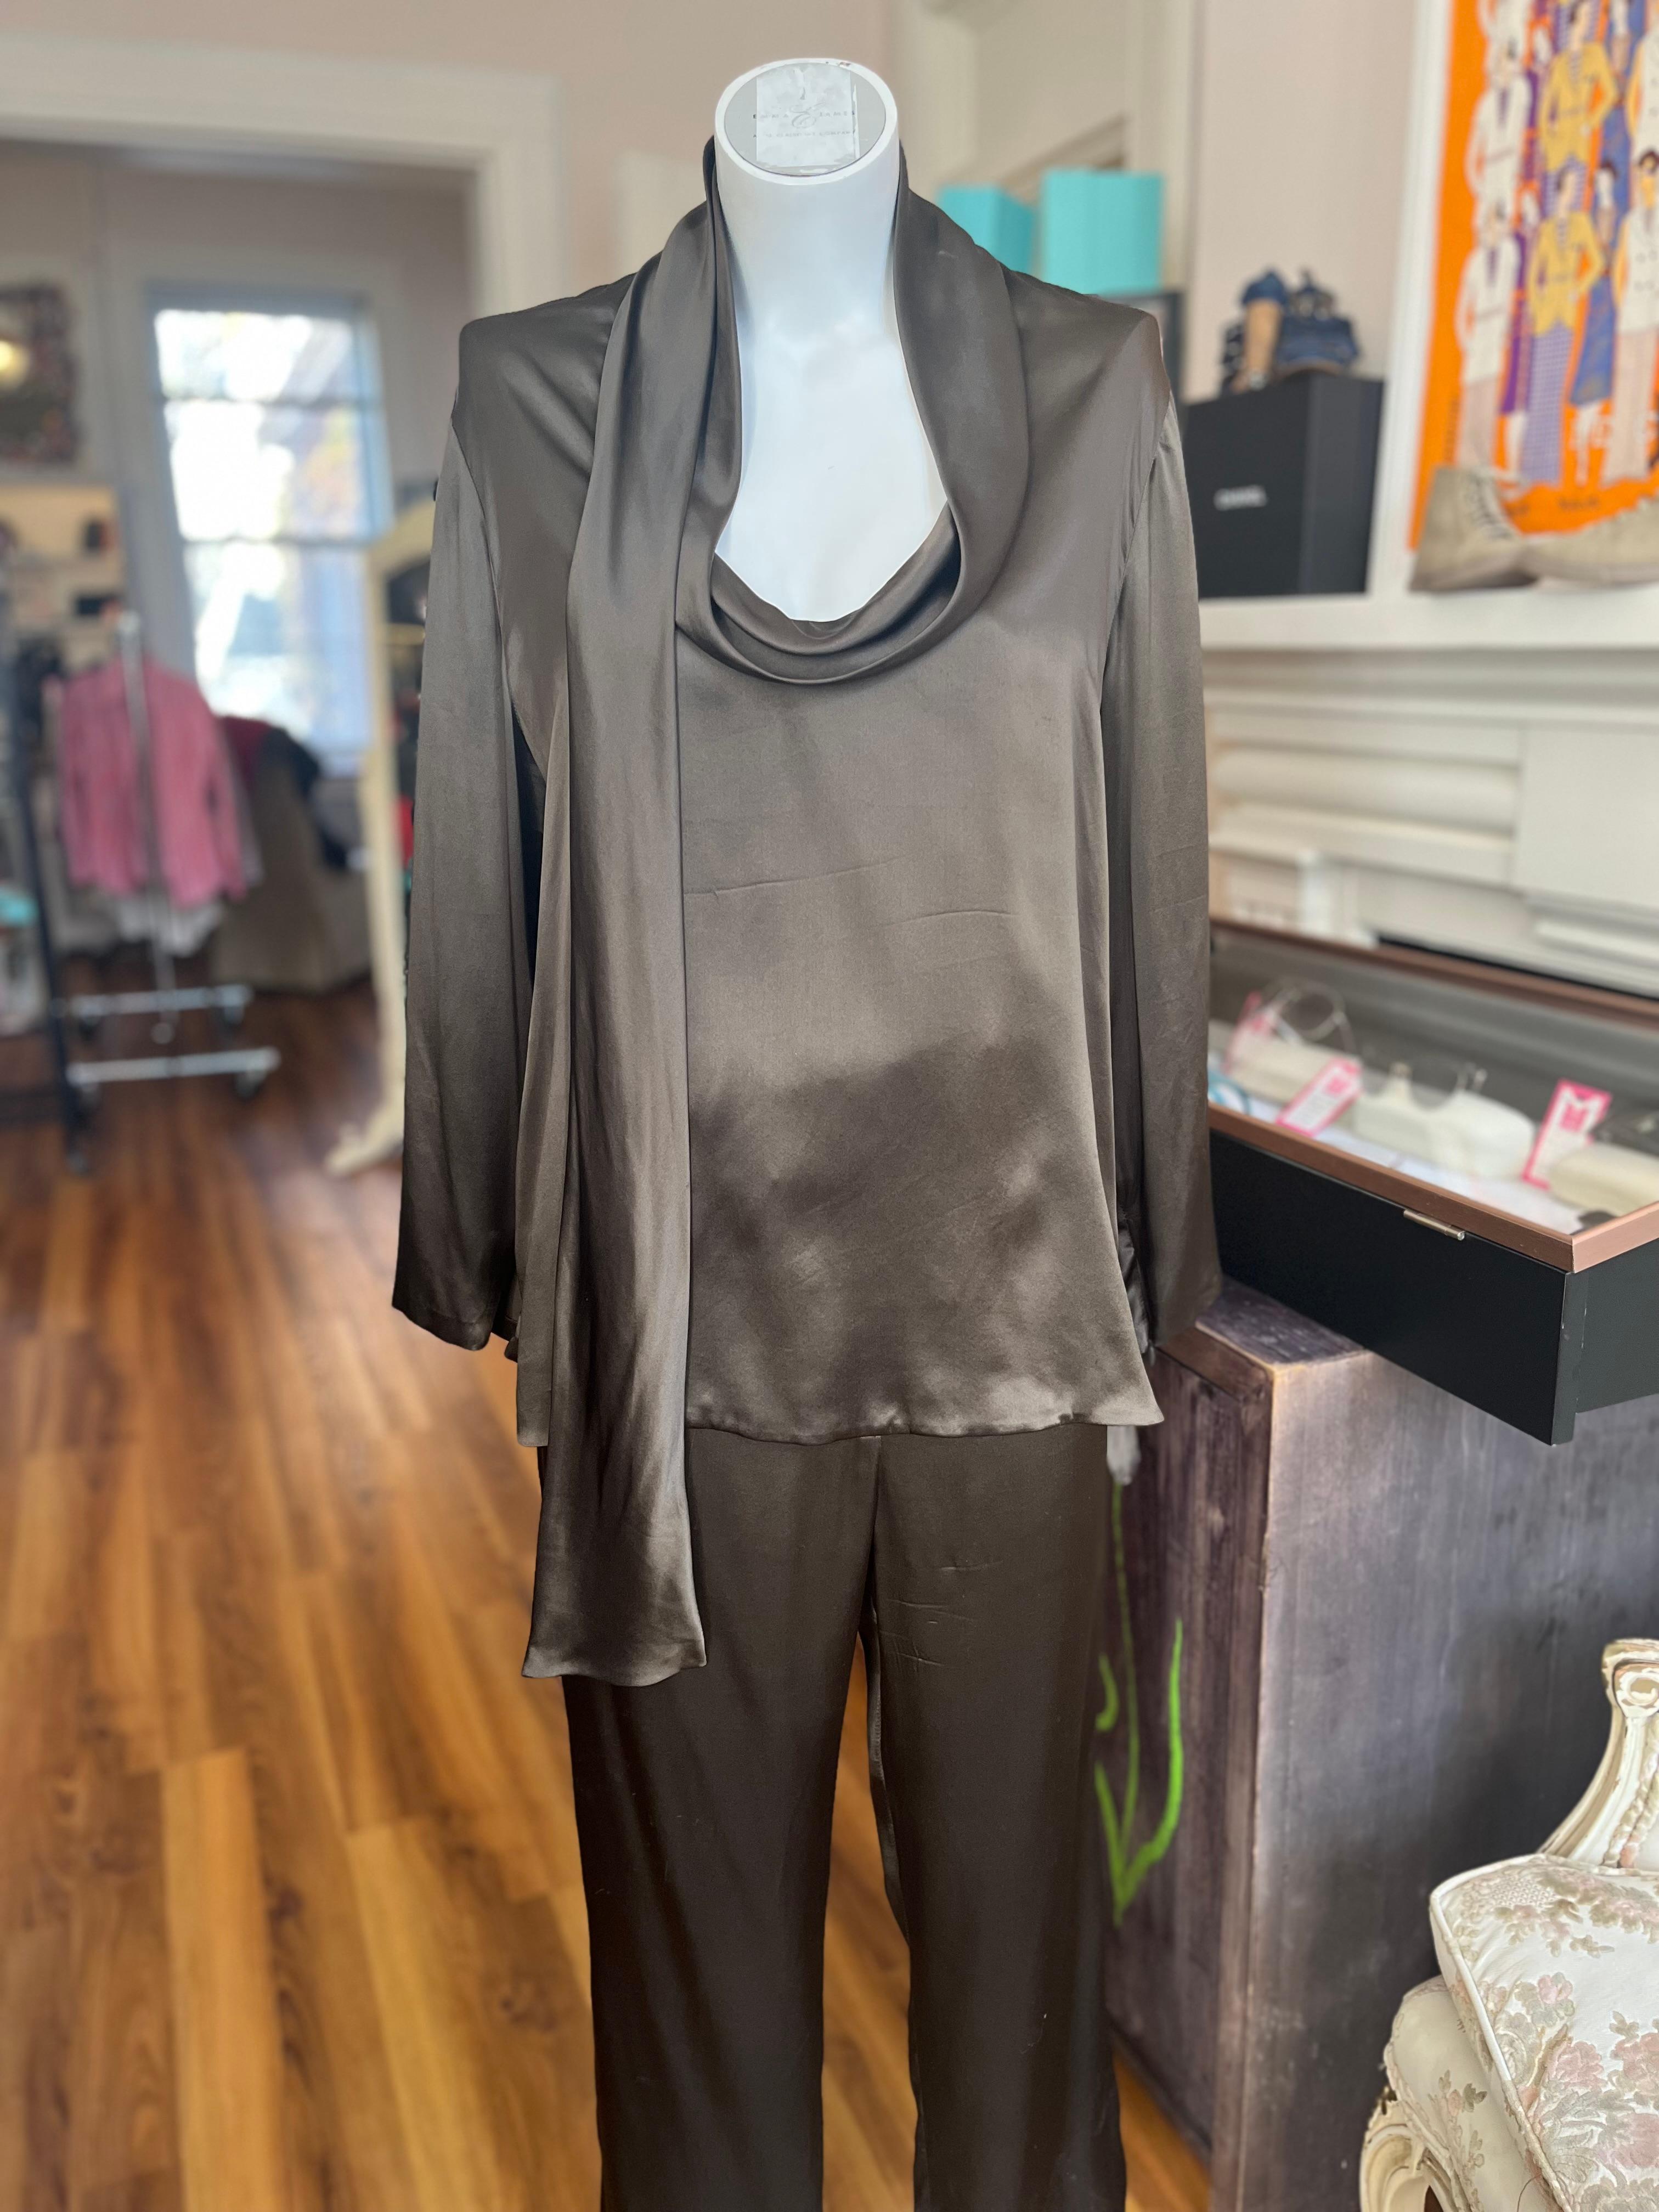 2019 Tom Ford Silk Suit 46 (itl) In Excellent Condition For Sale In Port Hope, ON